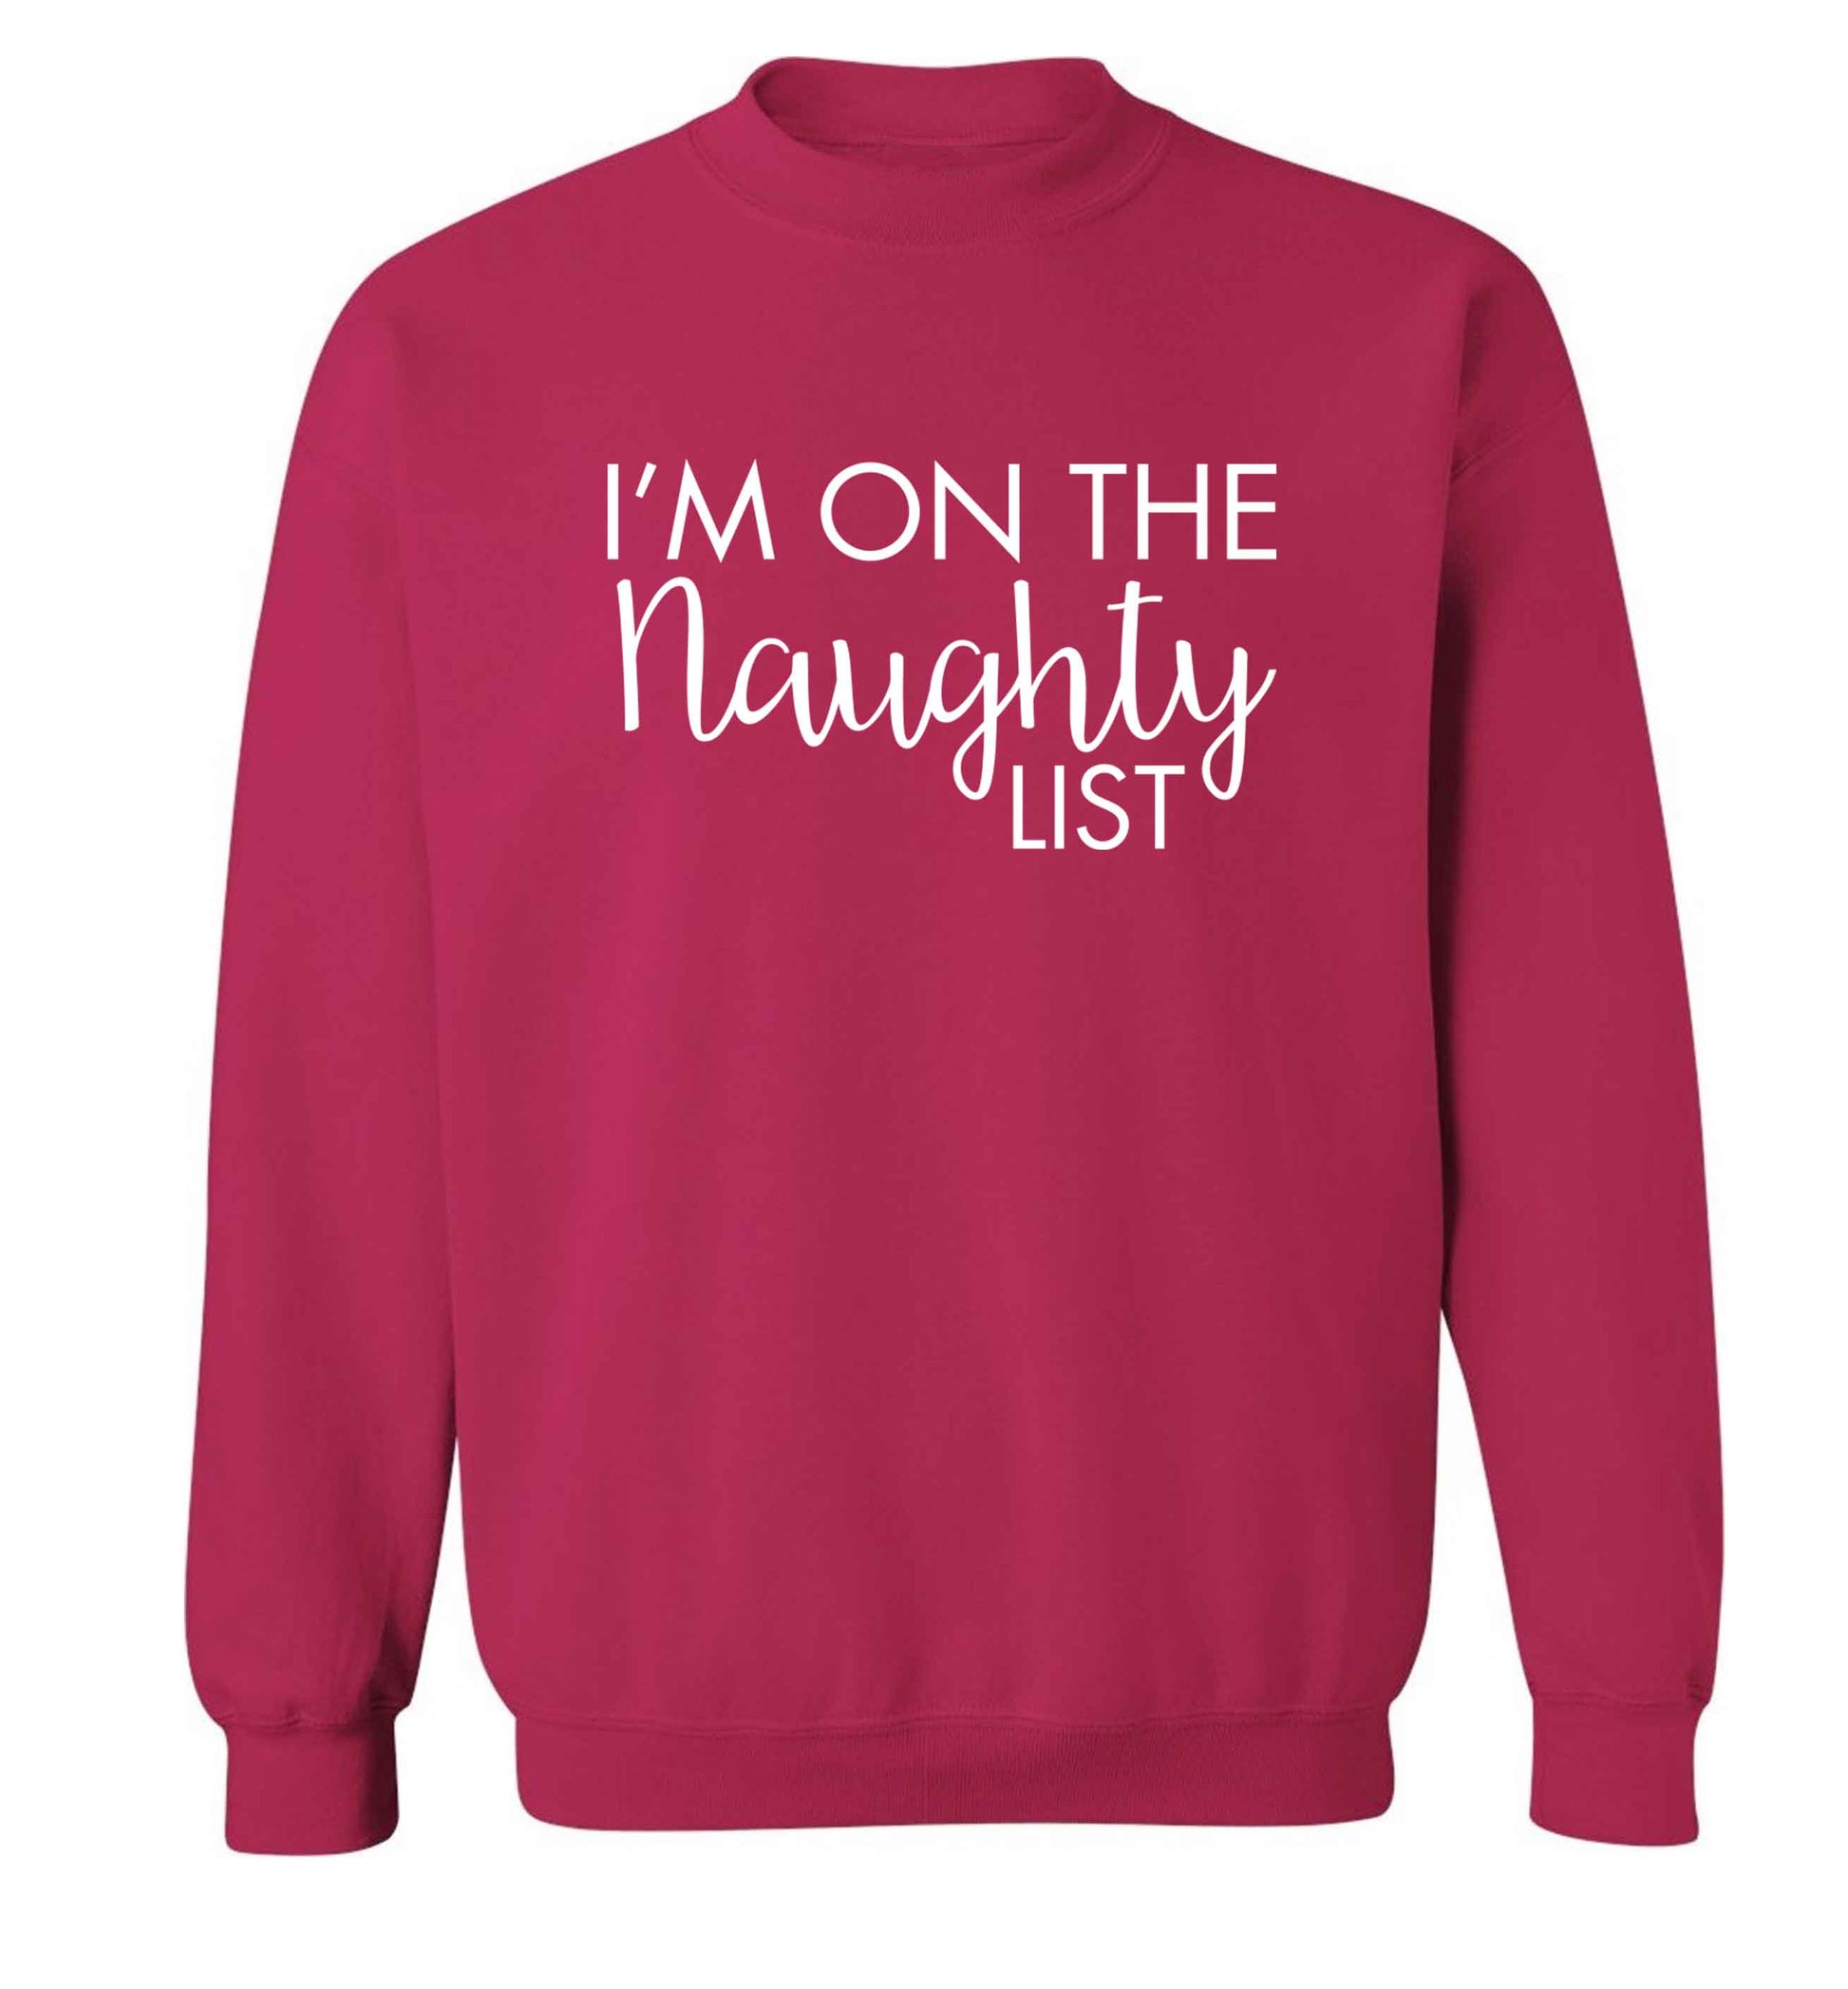 I'm on the naughty list adult's unisex pink sweater 2XL